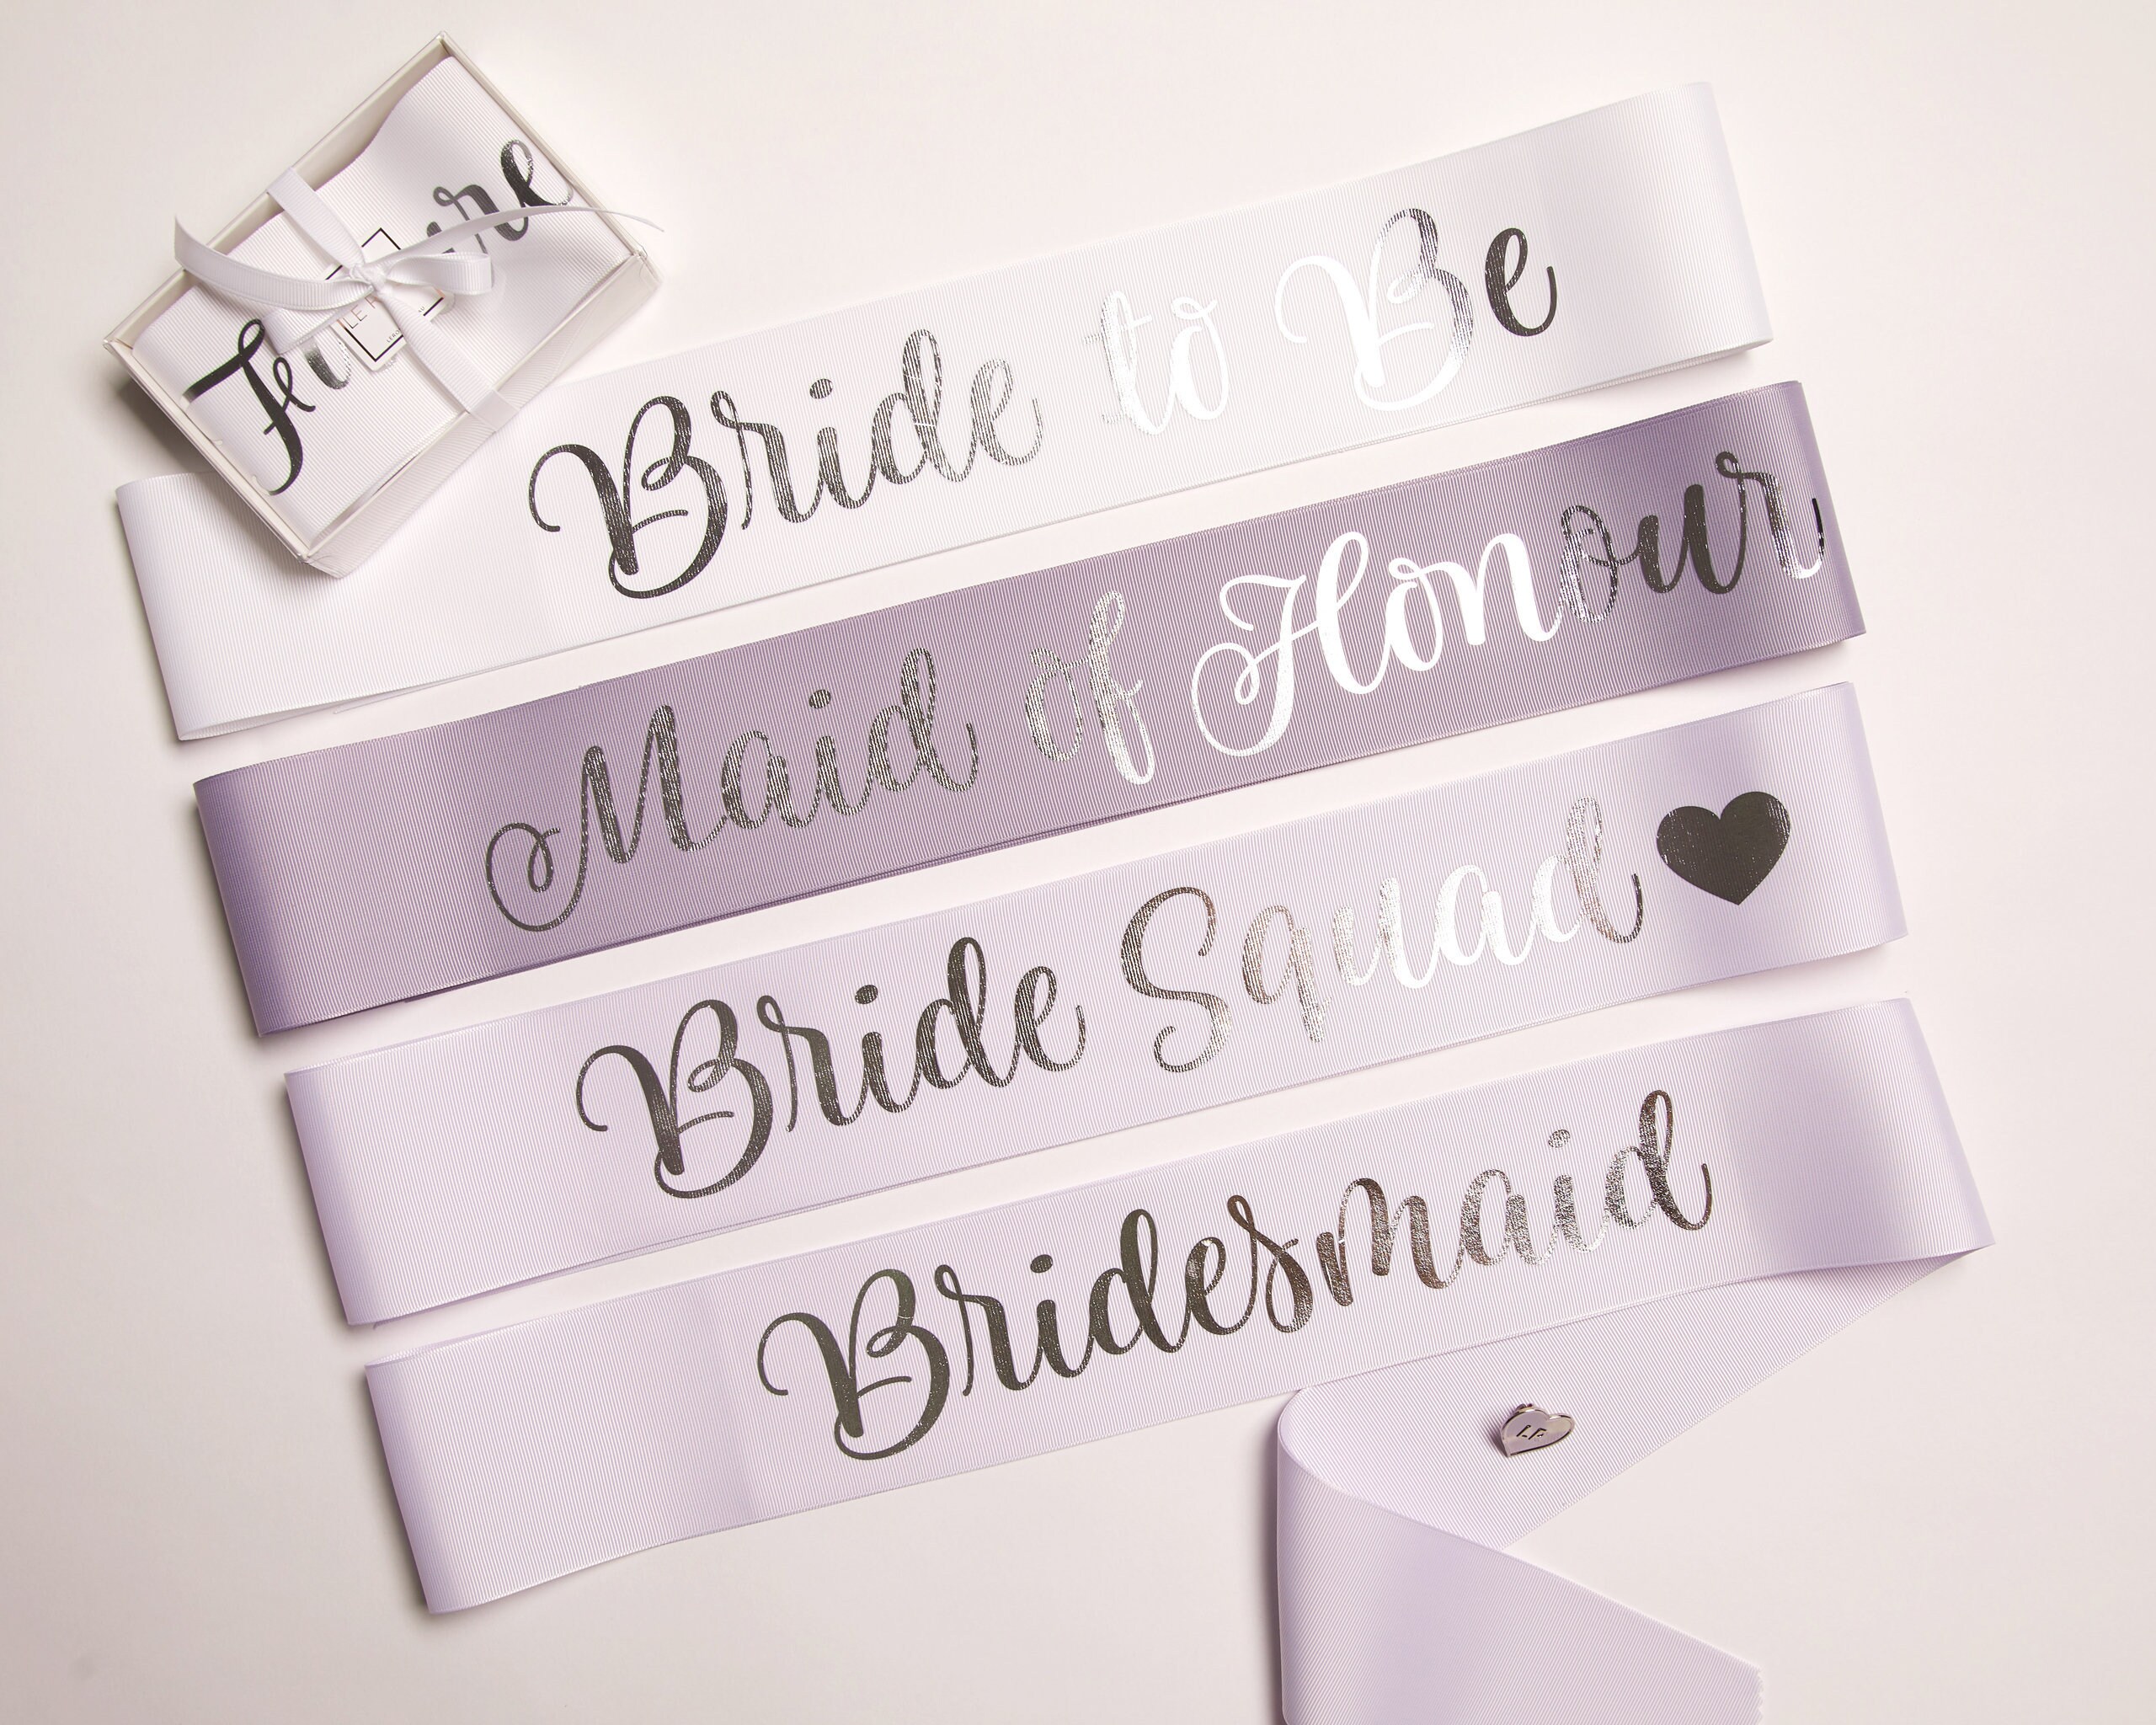 Hen Party Sashes Hen Night Party Do Sash Accessories Pink with Black Text 